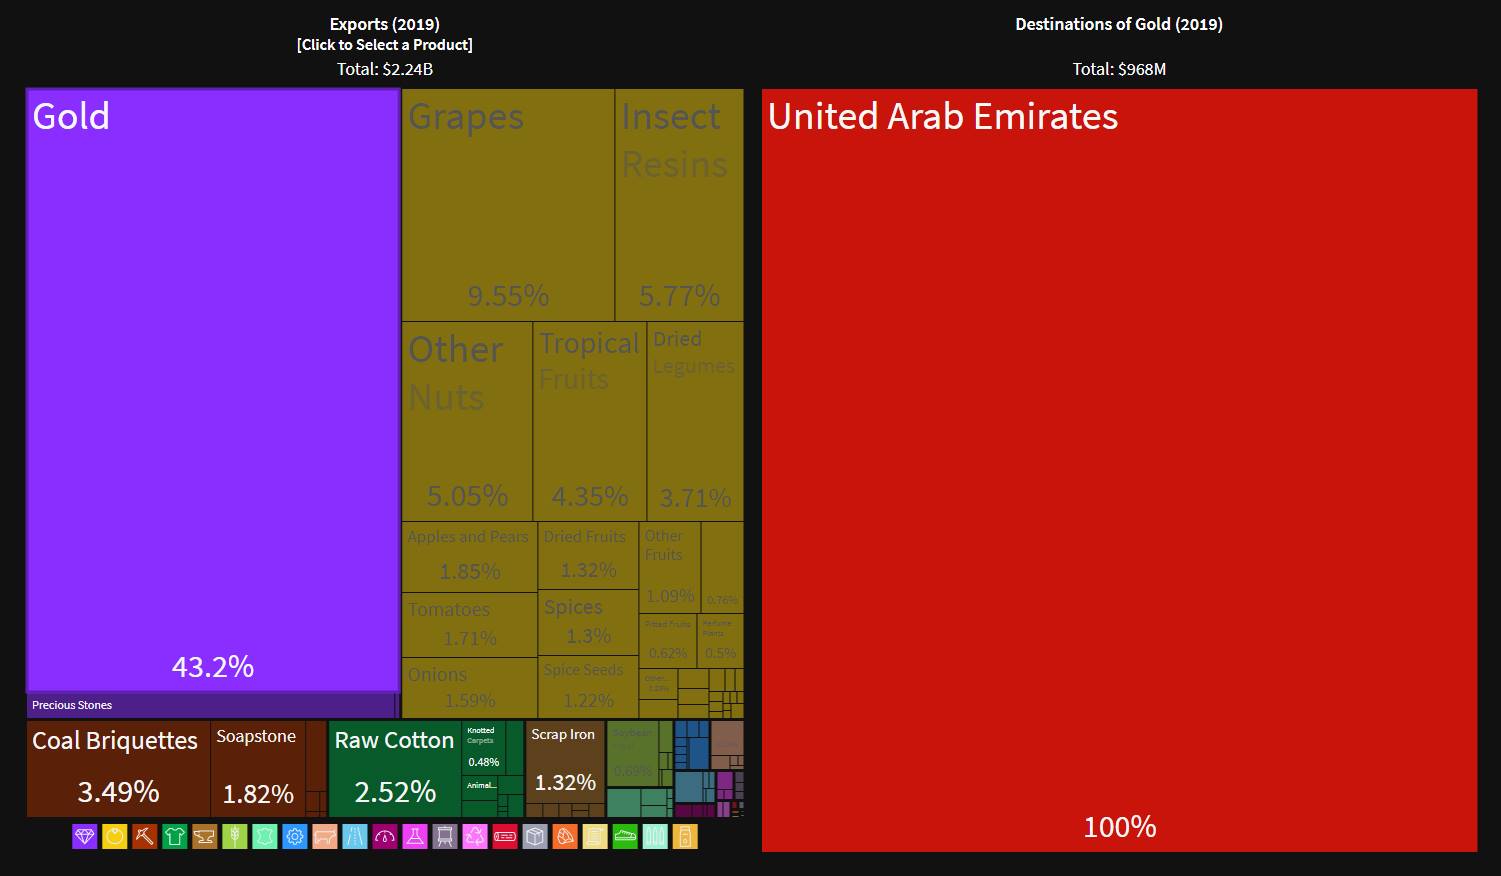 43.2% of Afghanistan's annual exports is Gold, the single...